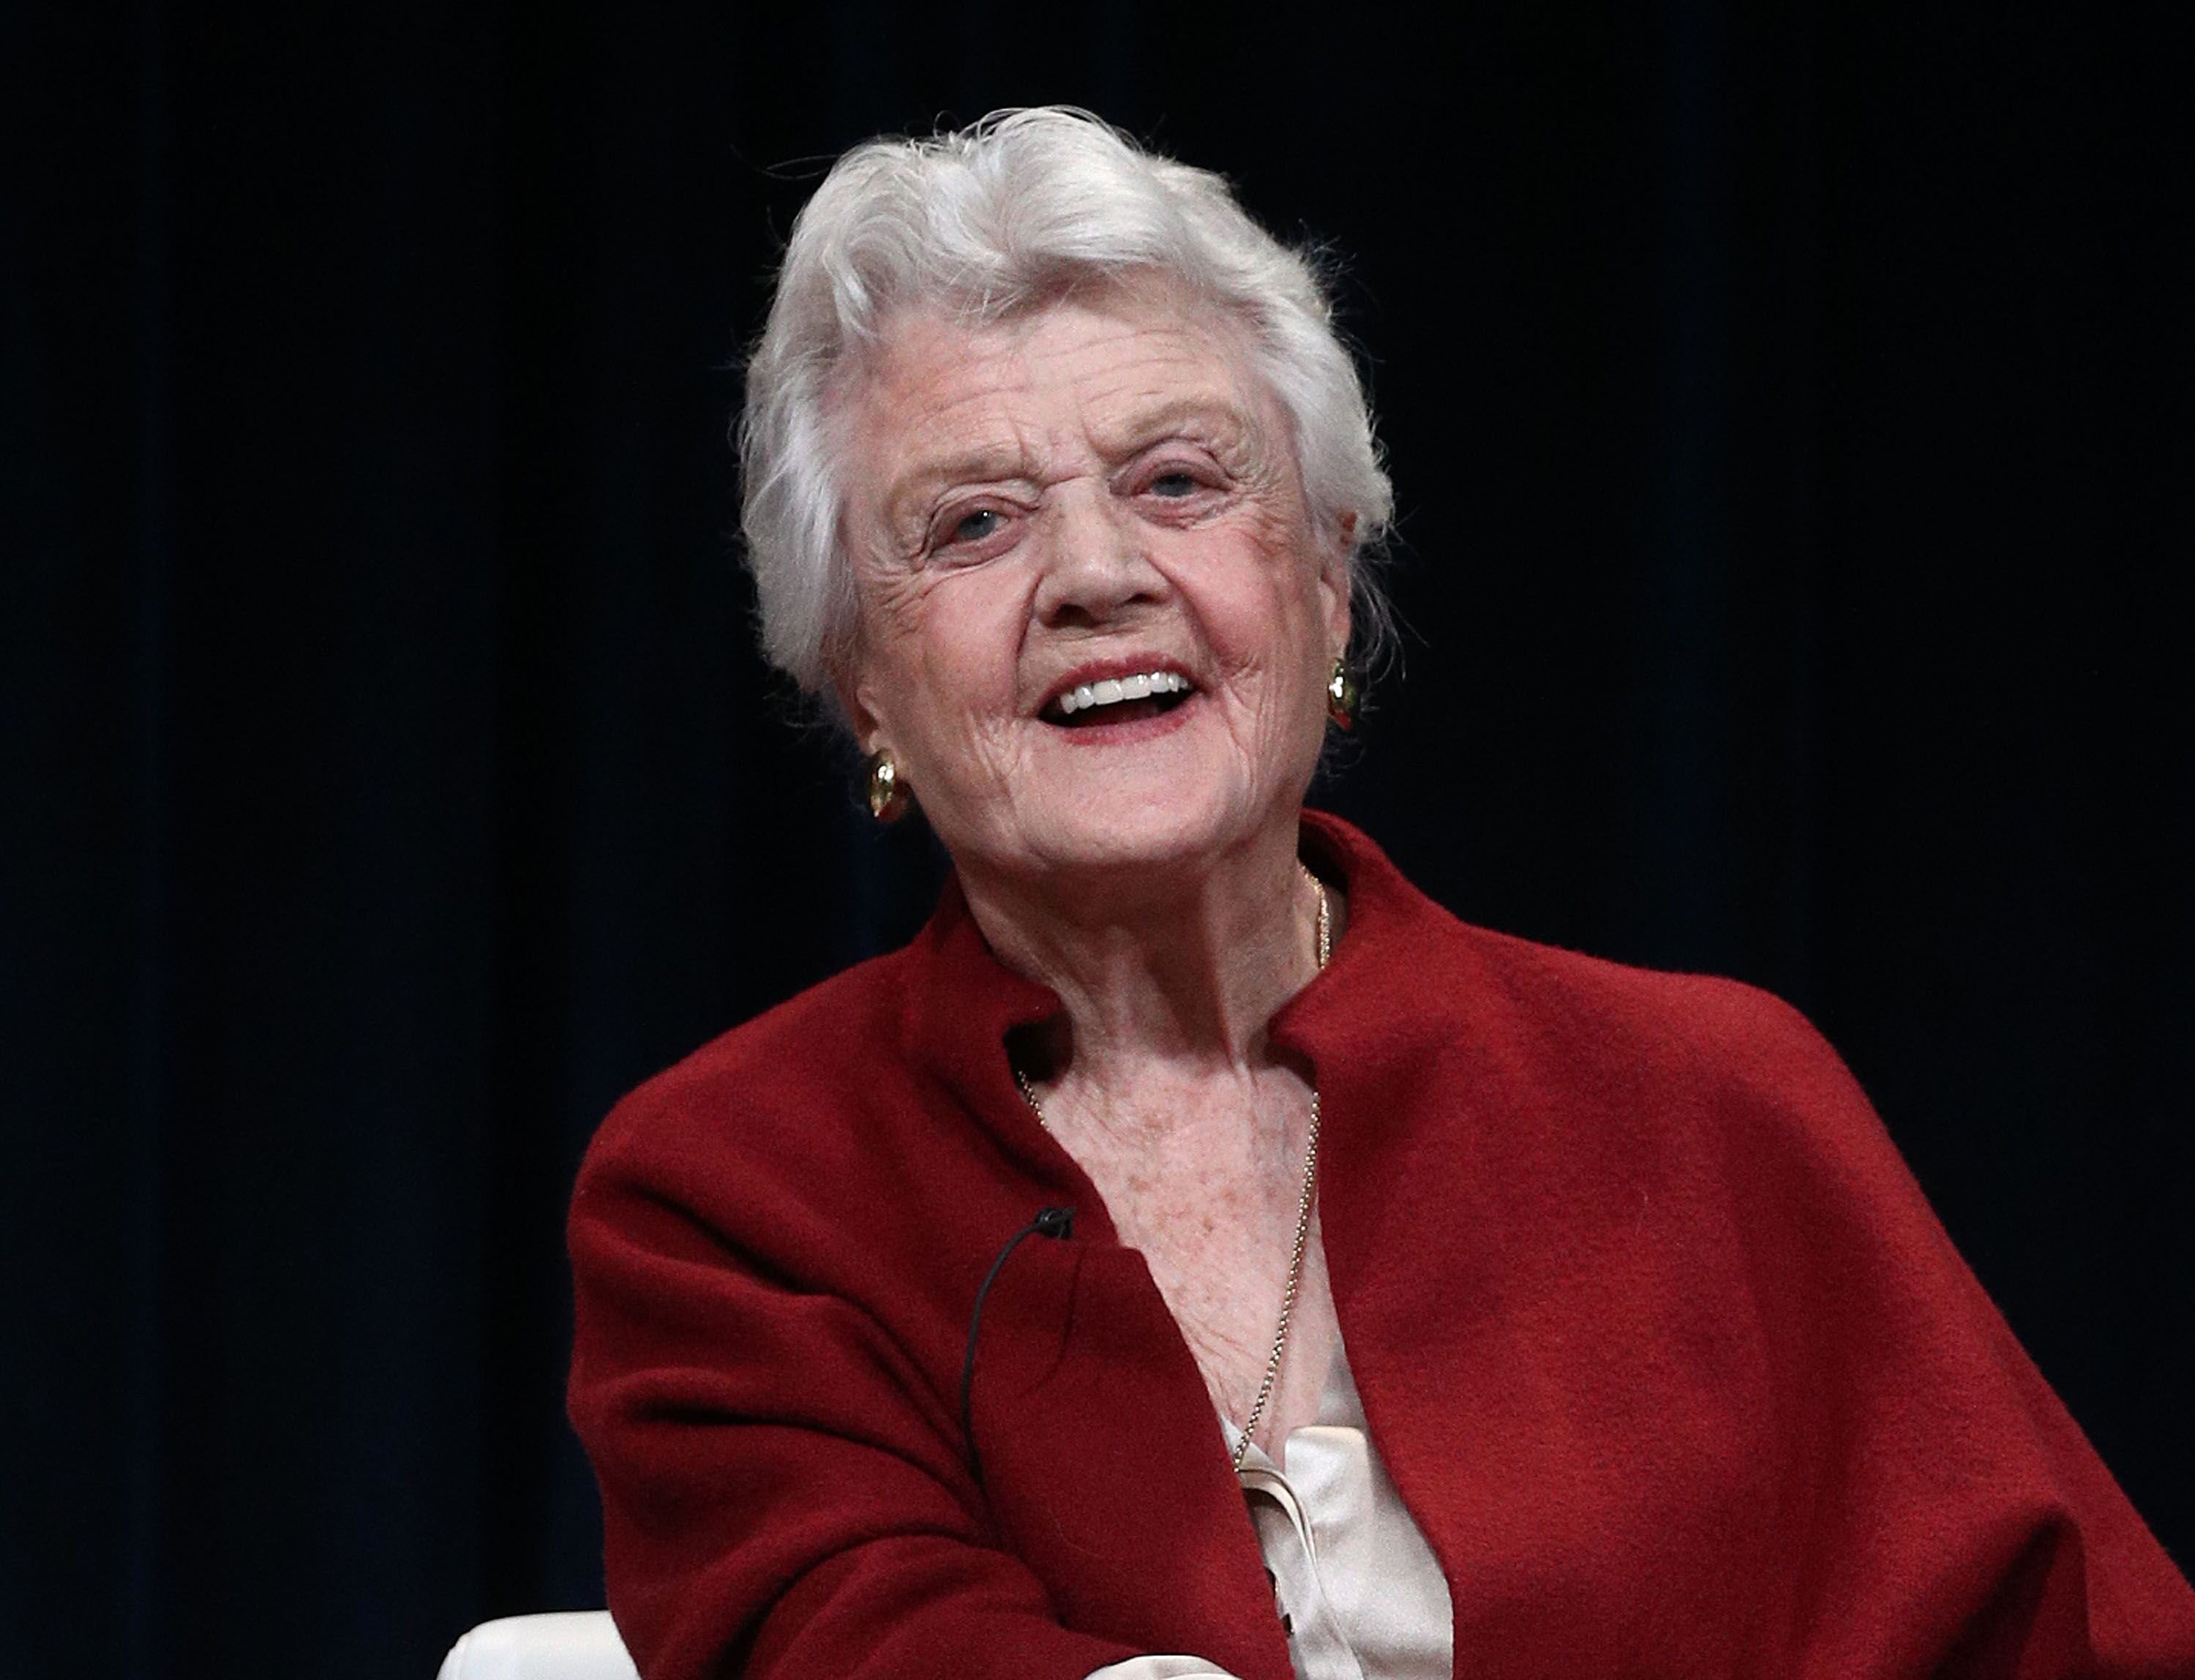 A portrait of Angela Lansbury taken at The Langham Huntington in Pasadena in January 2018. | Photo: Getty Images